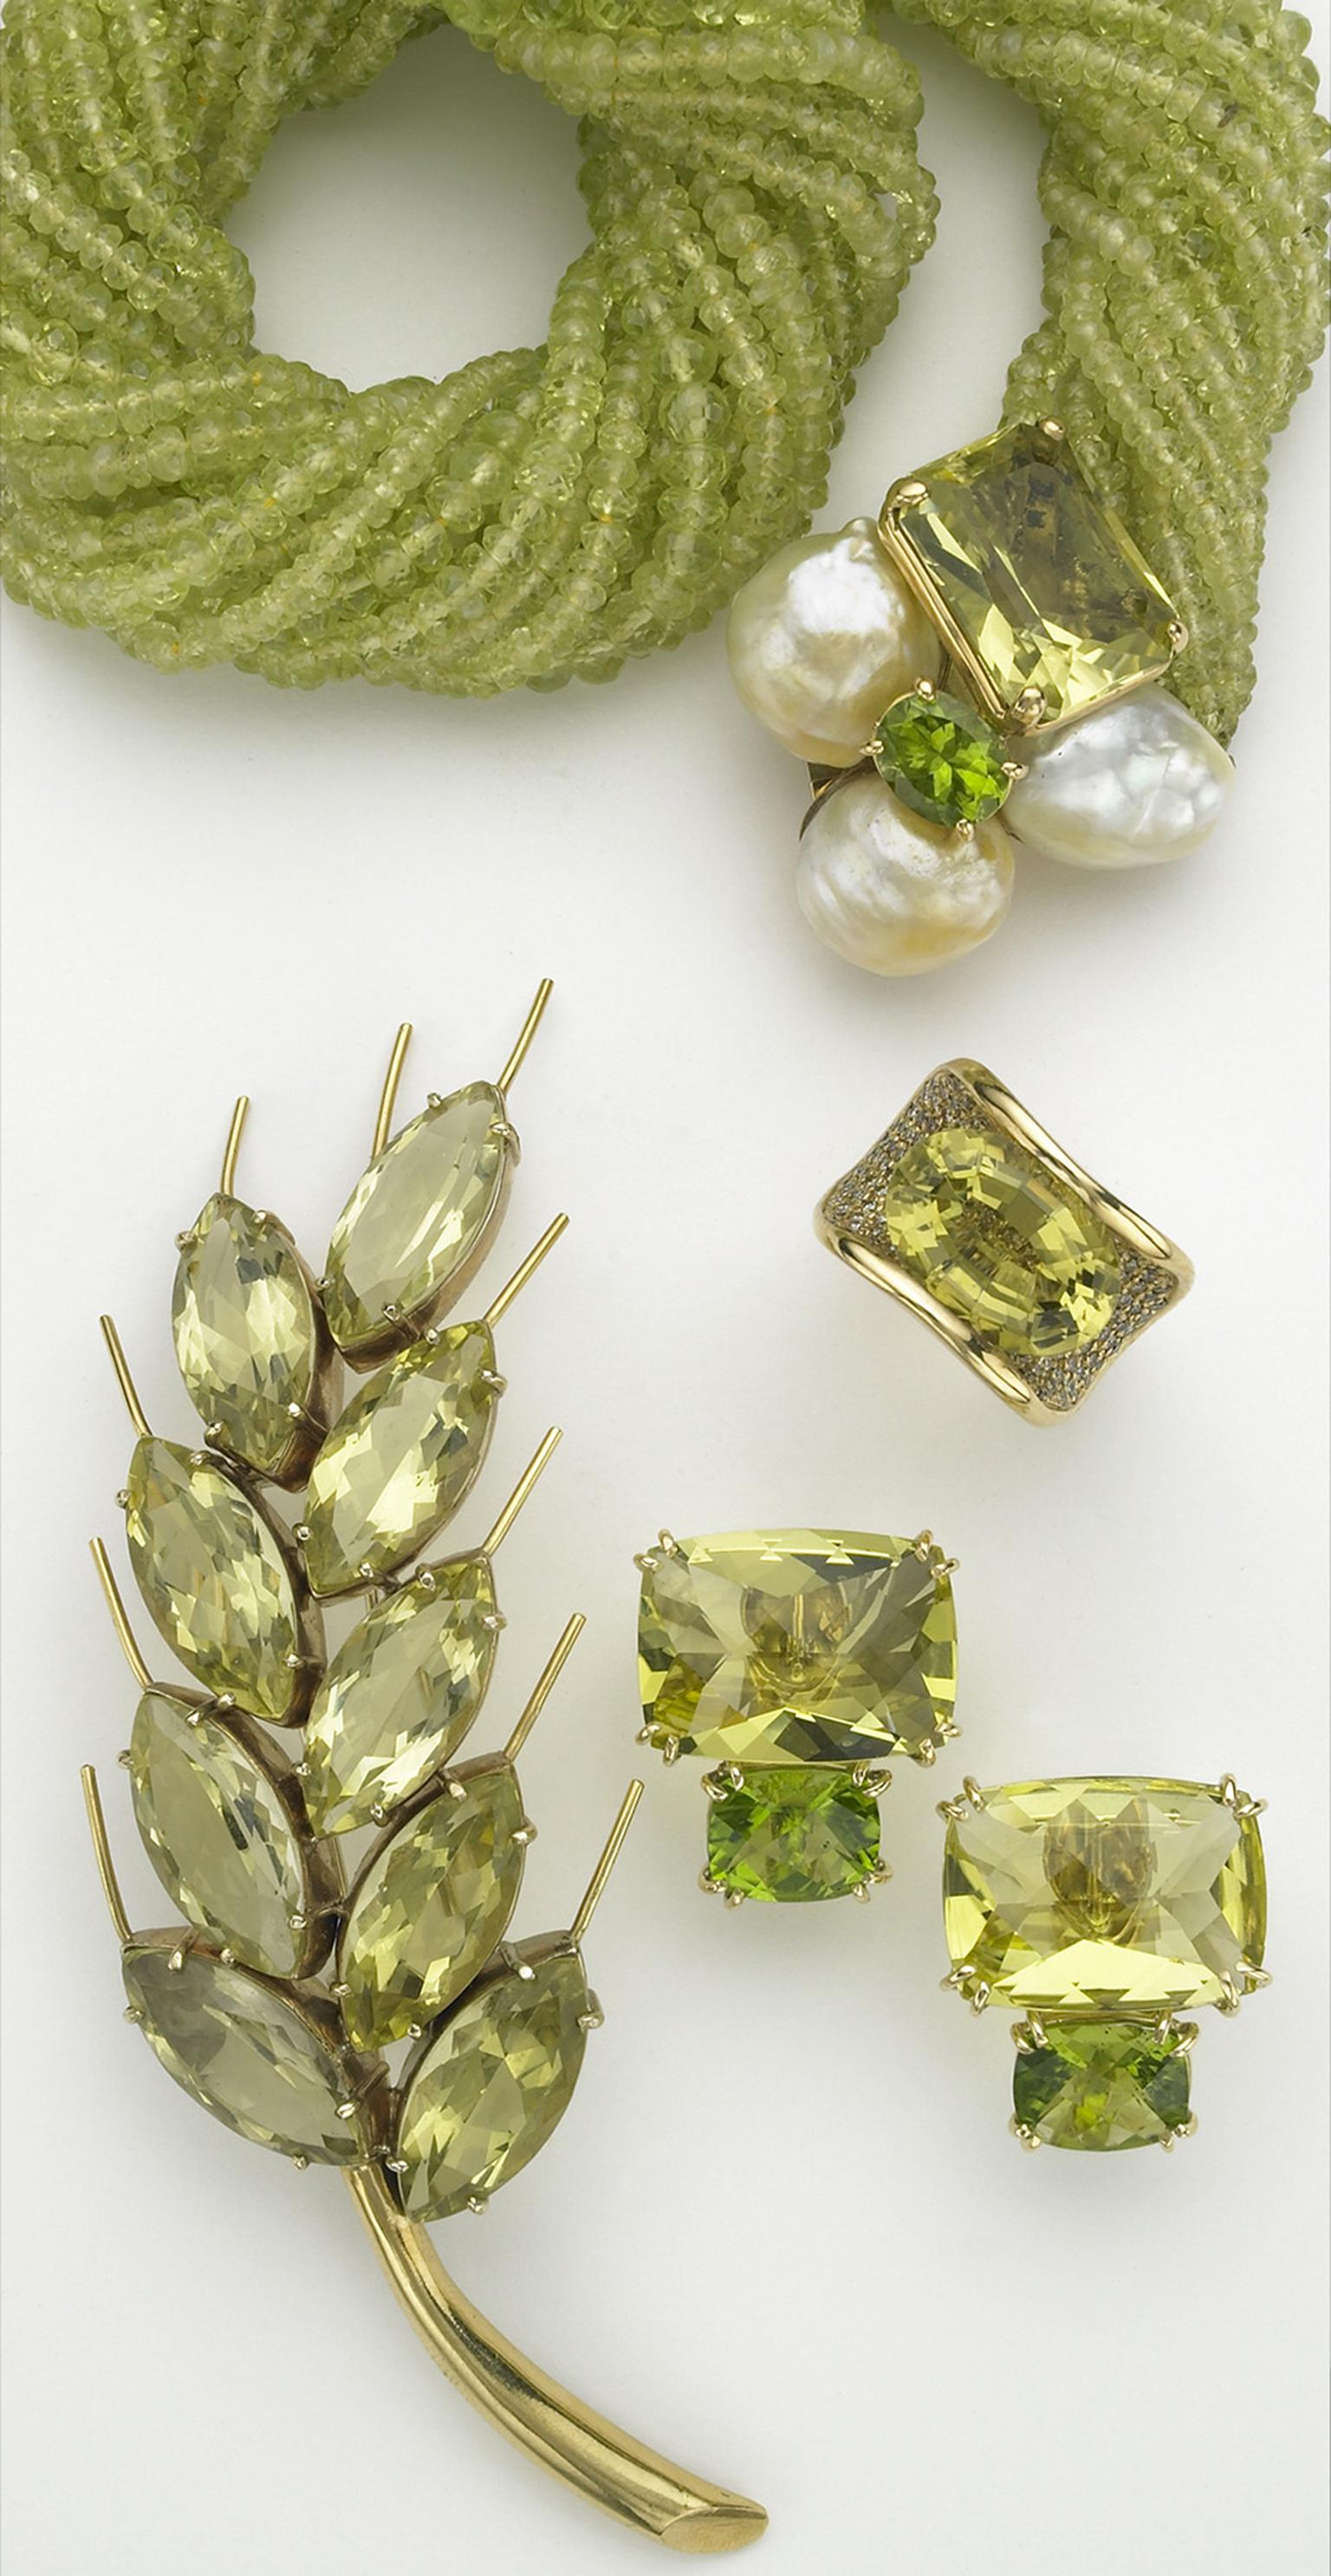 Sorab & Roshi faceted chrysoberyl bead necklace with a bubble clasp of South Sea pearls, lemon citrine and peridot; Jubilee ring with lemon citrine and pavé champagne diamonds; rectangular cushion earrings with lemon citrine and peridot; Wheat pin with fa